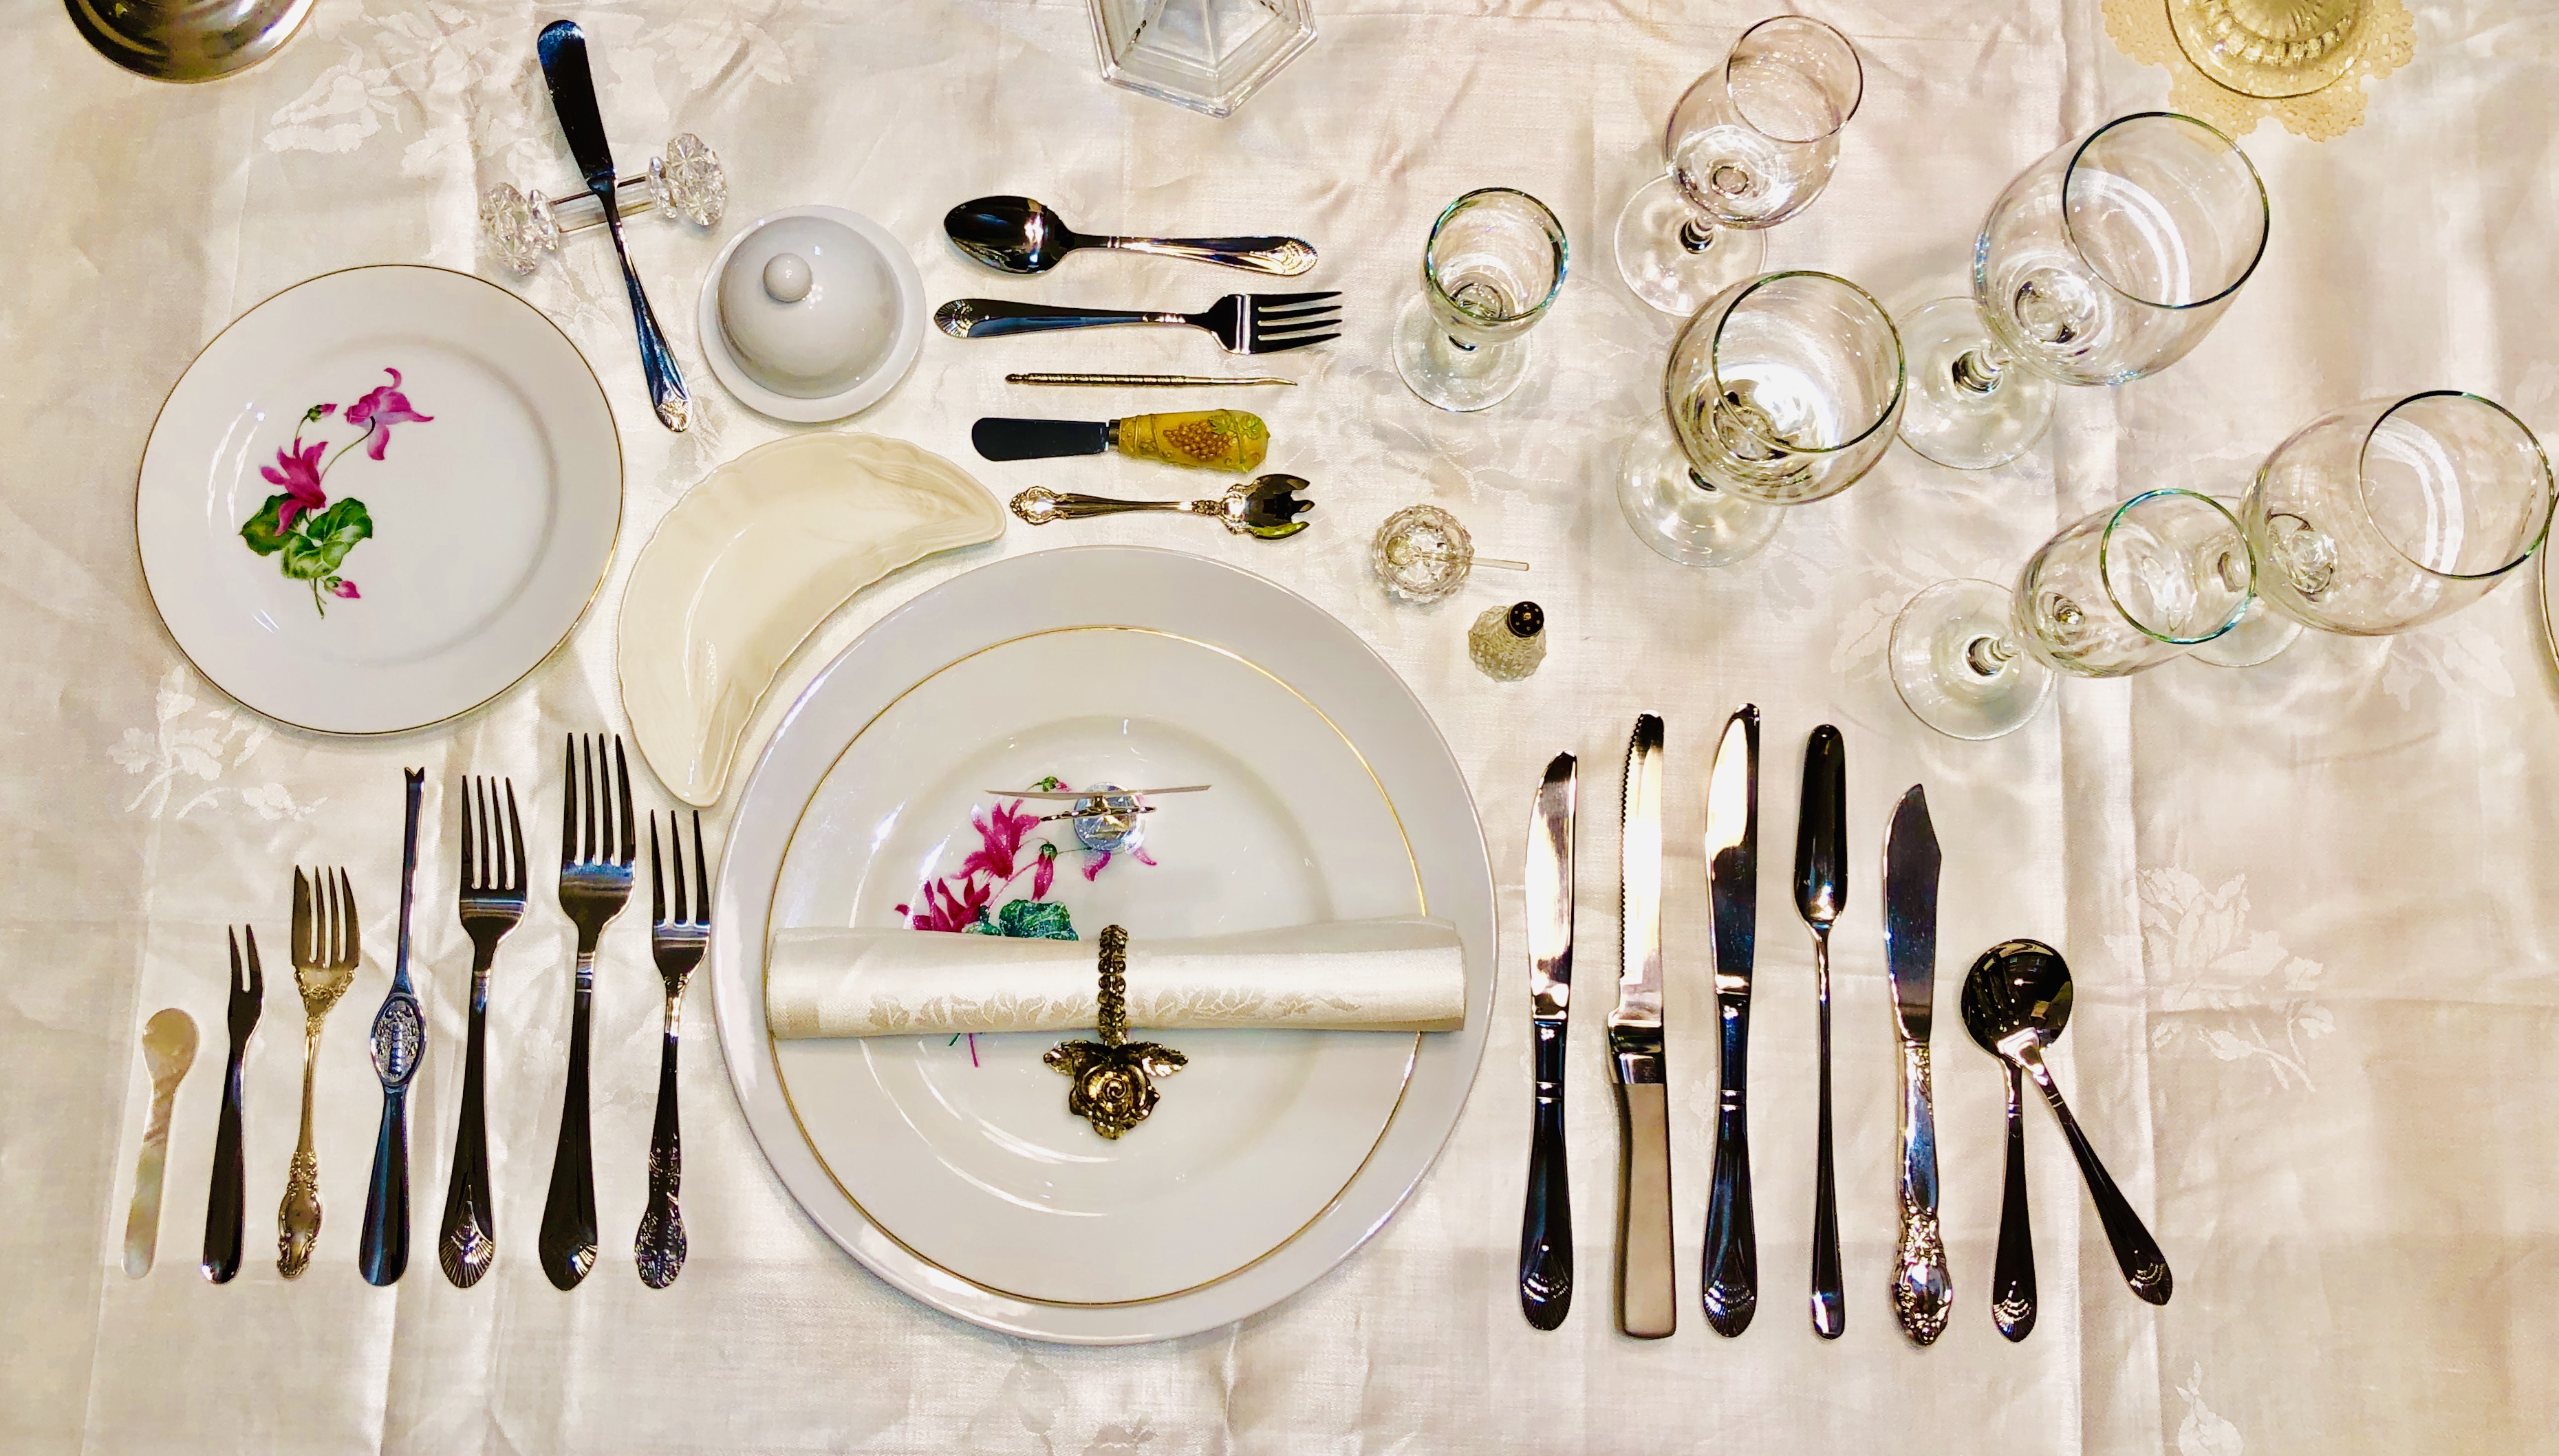 How to set a table with flatware?